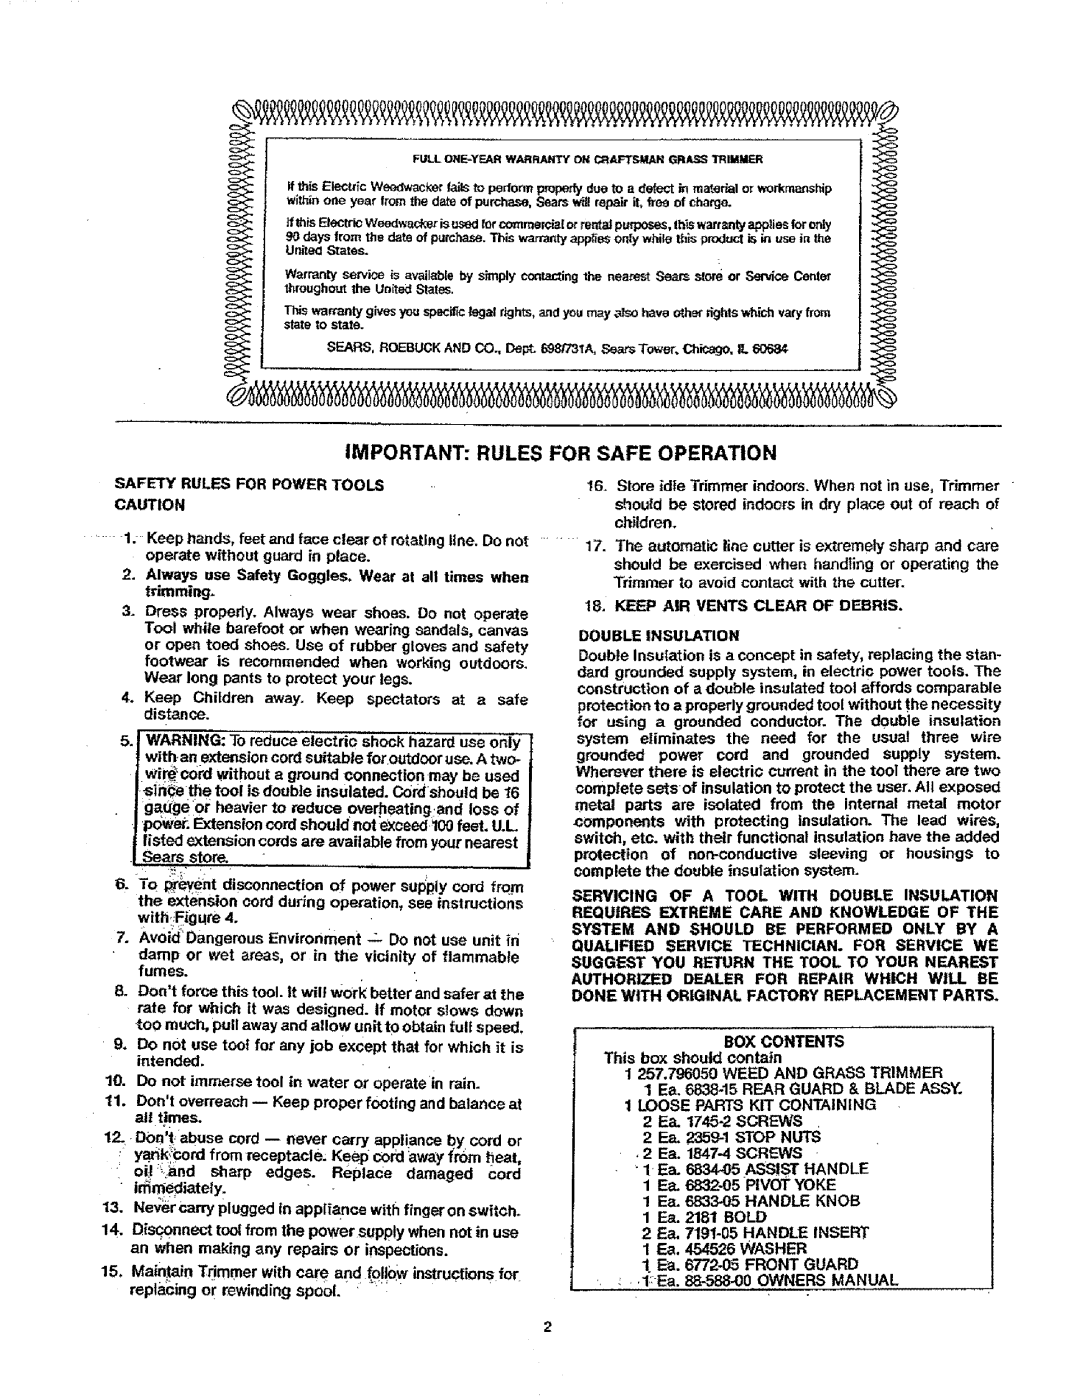 Sears 257.79605 manual Important Rules For Safe Operation 